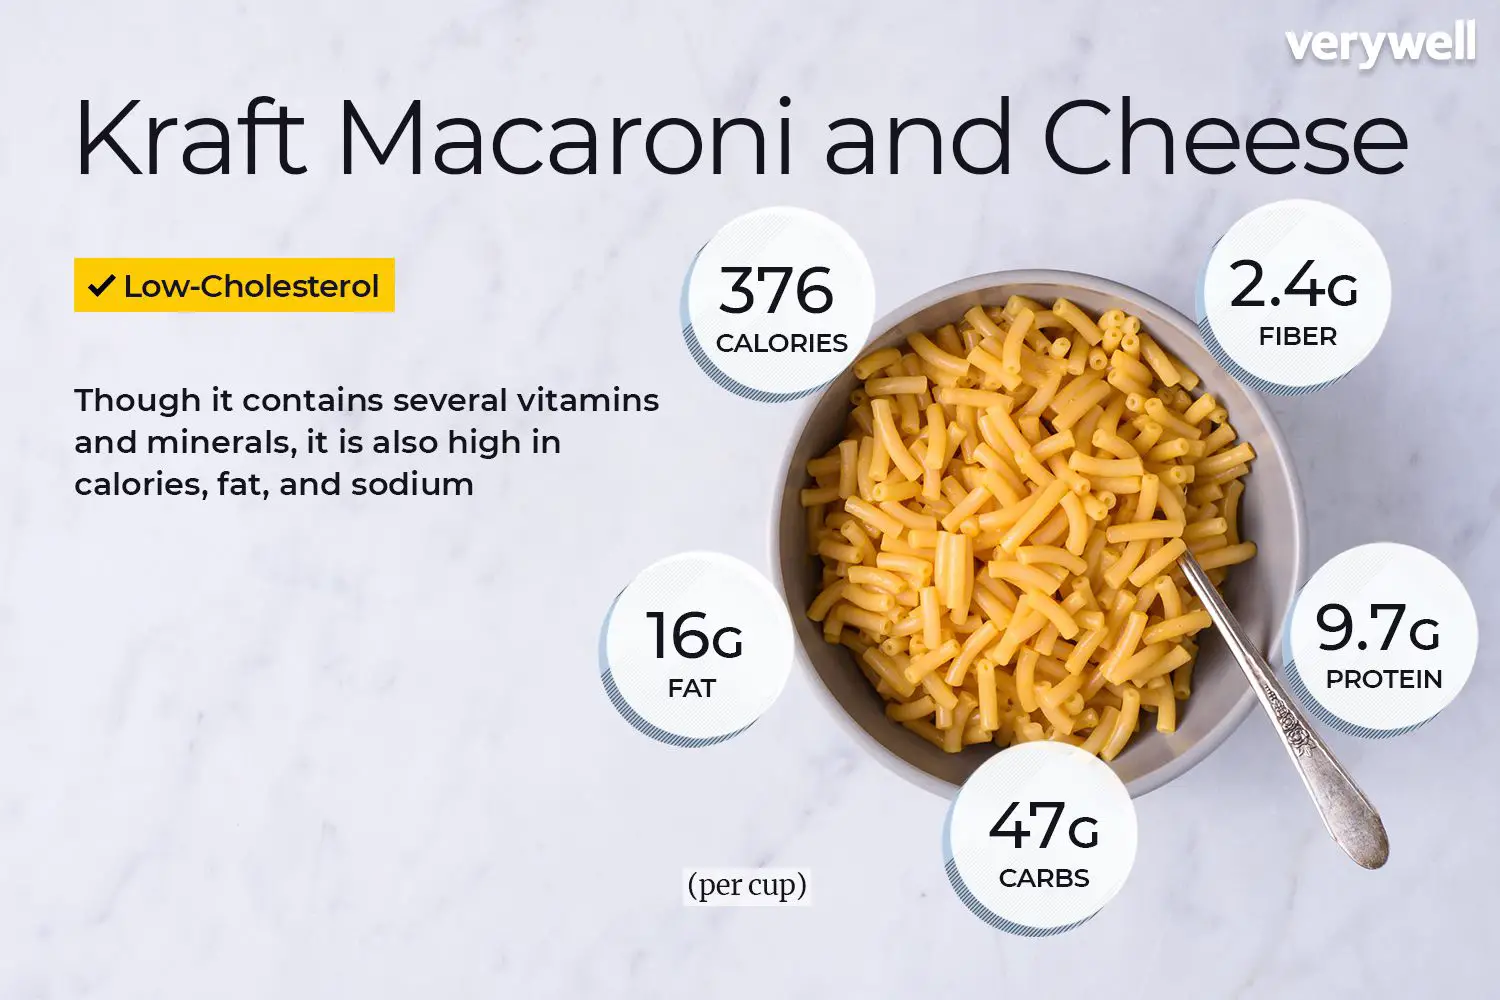 Mac and Cheese Calories, Carbs, and Nutrition Facts by Brand